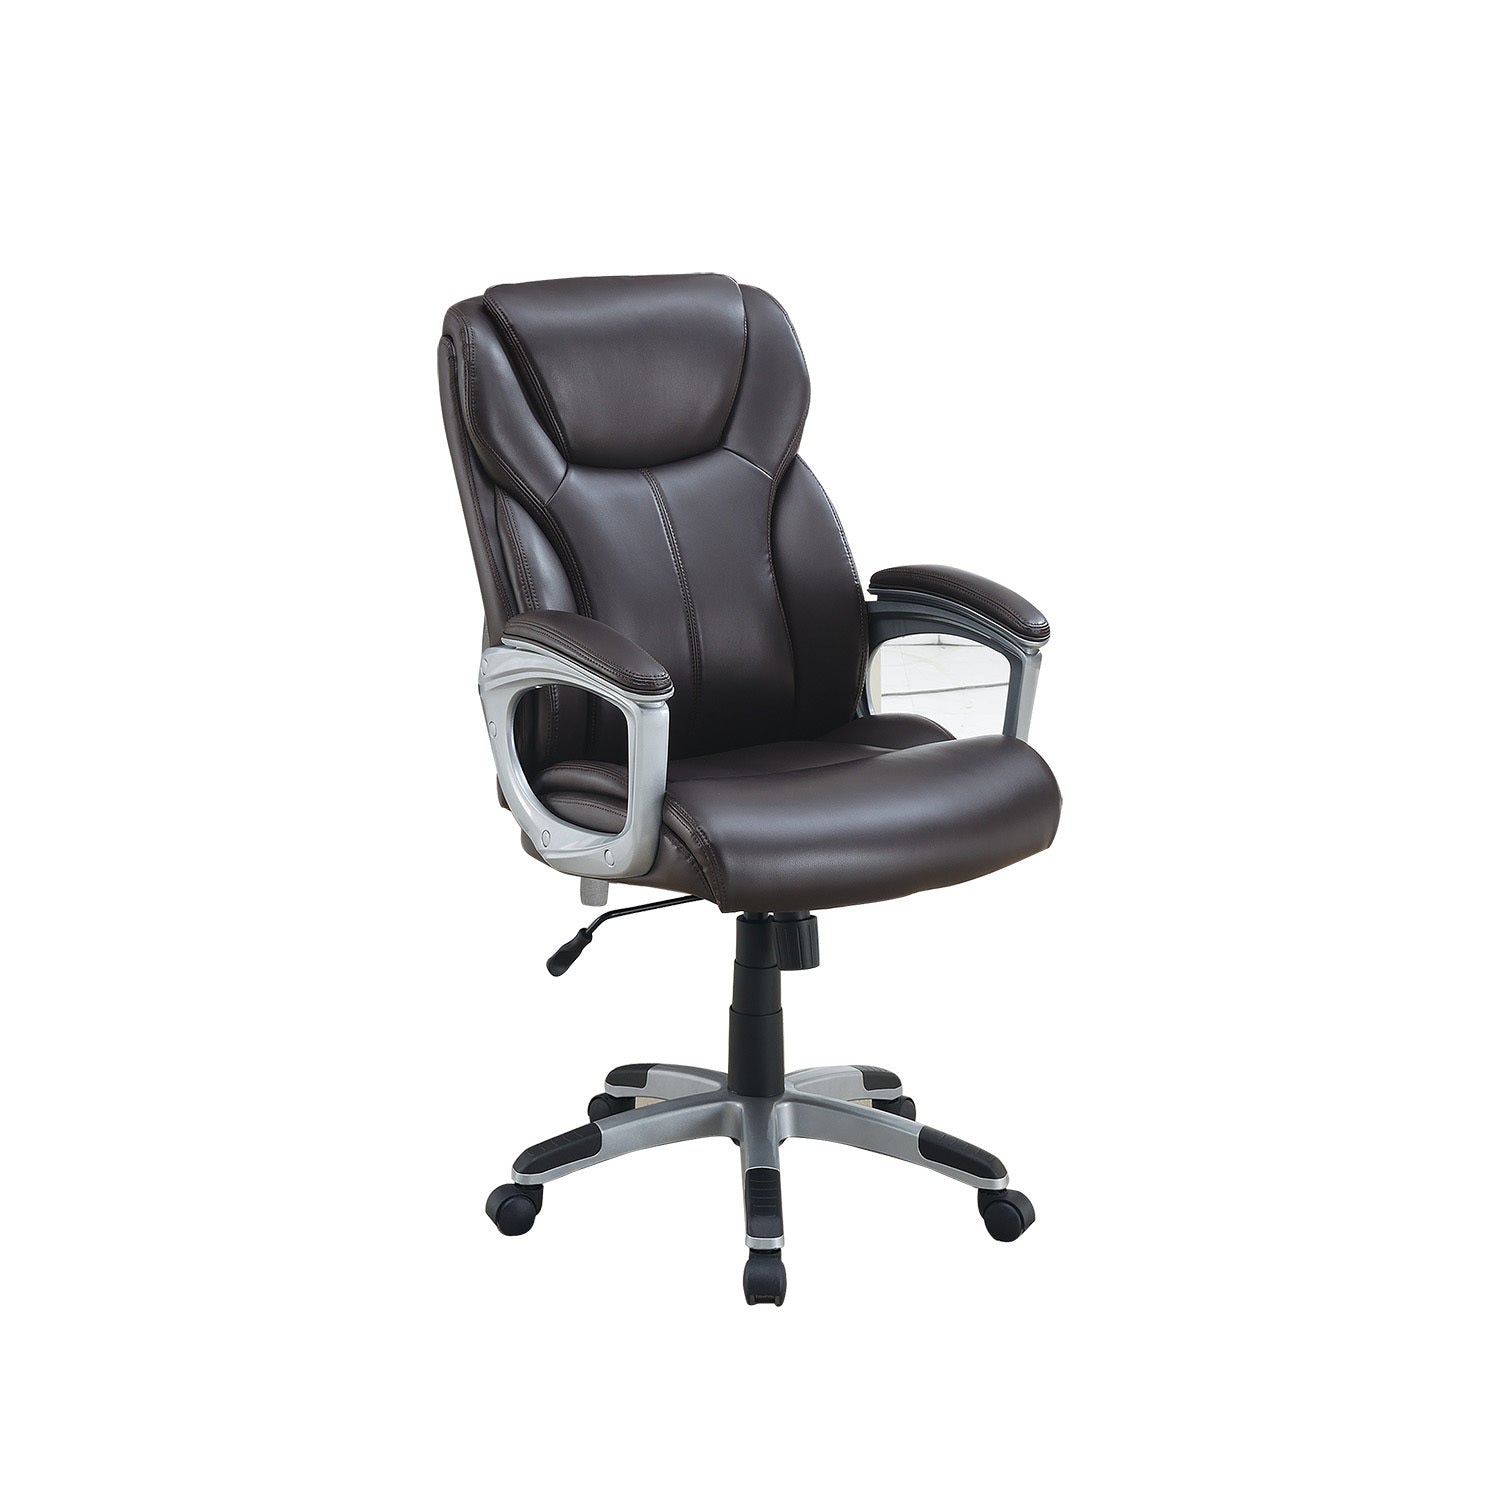 Adjustable Height Office Chair with PU Leather (Brown)